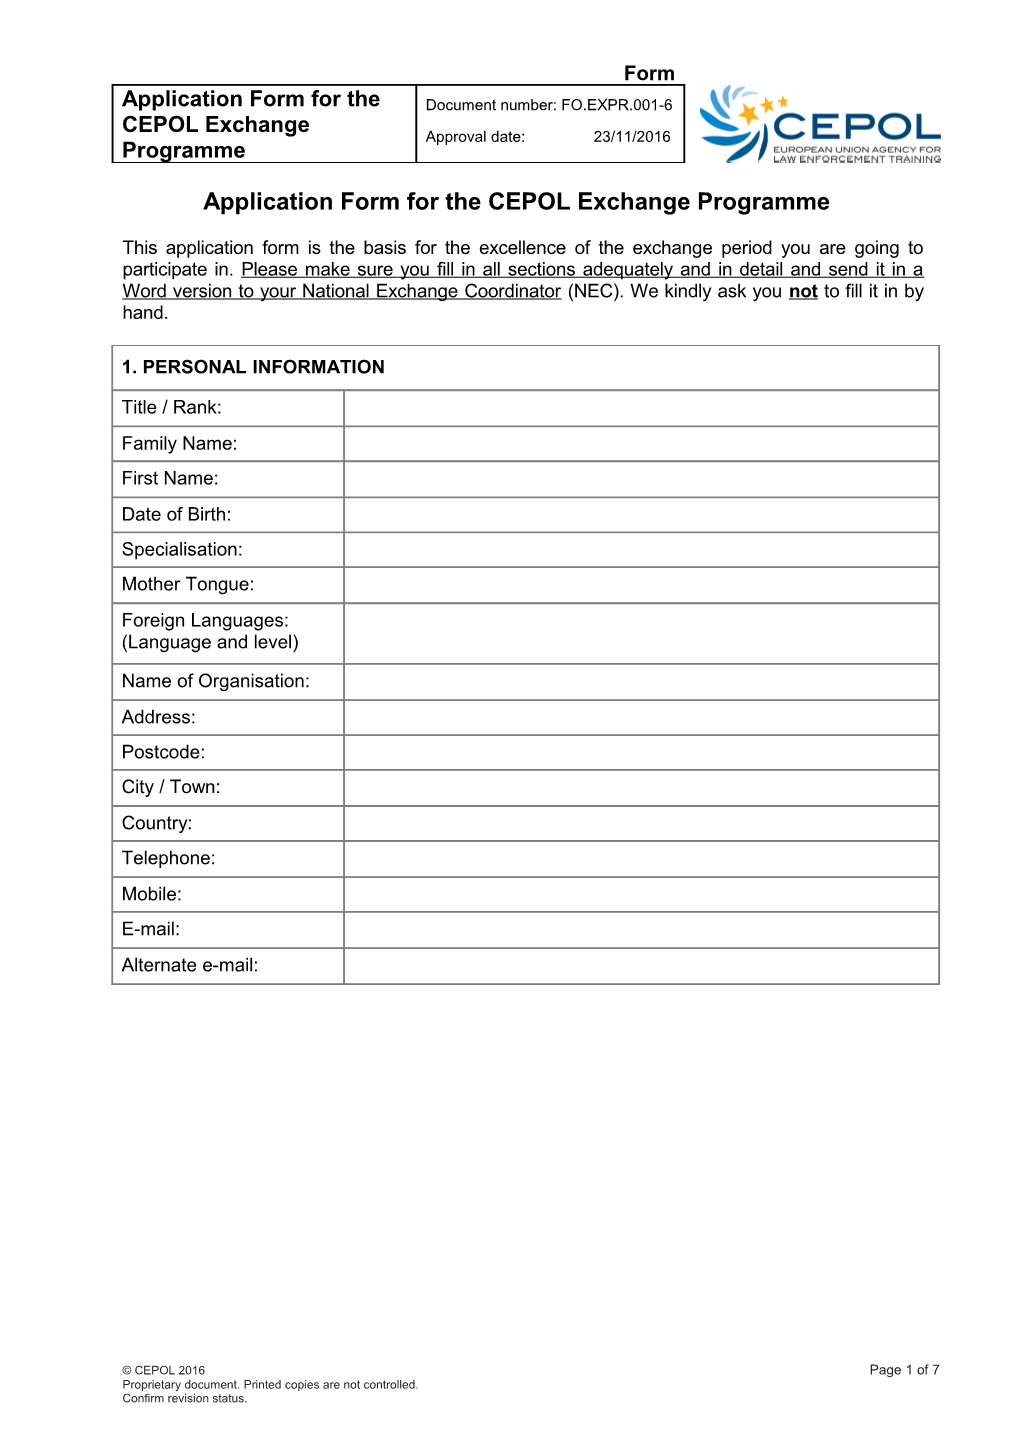 Application Form for the CEPOL Exchange Programme